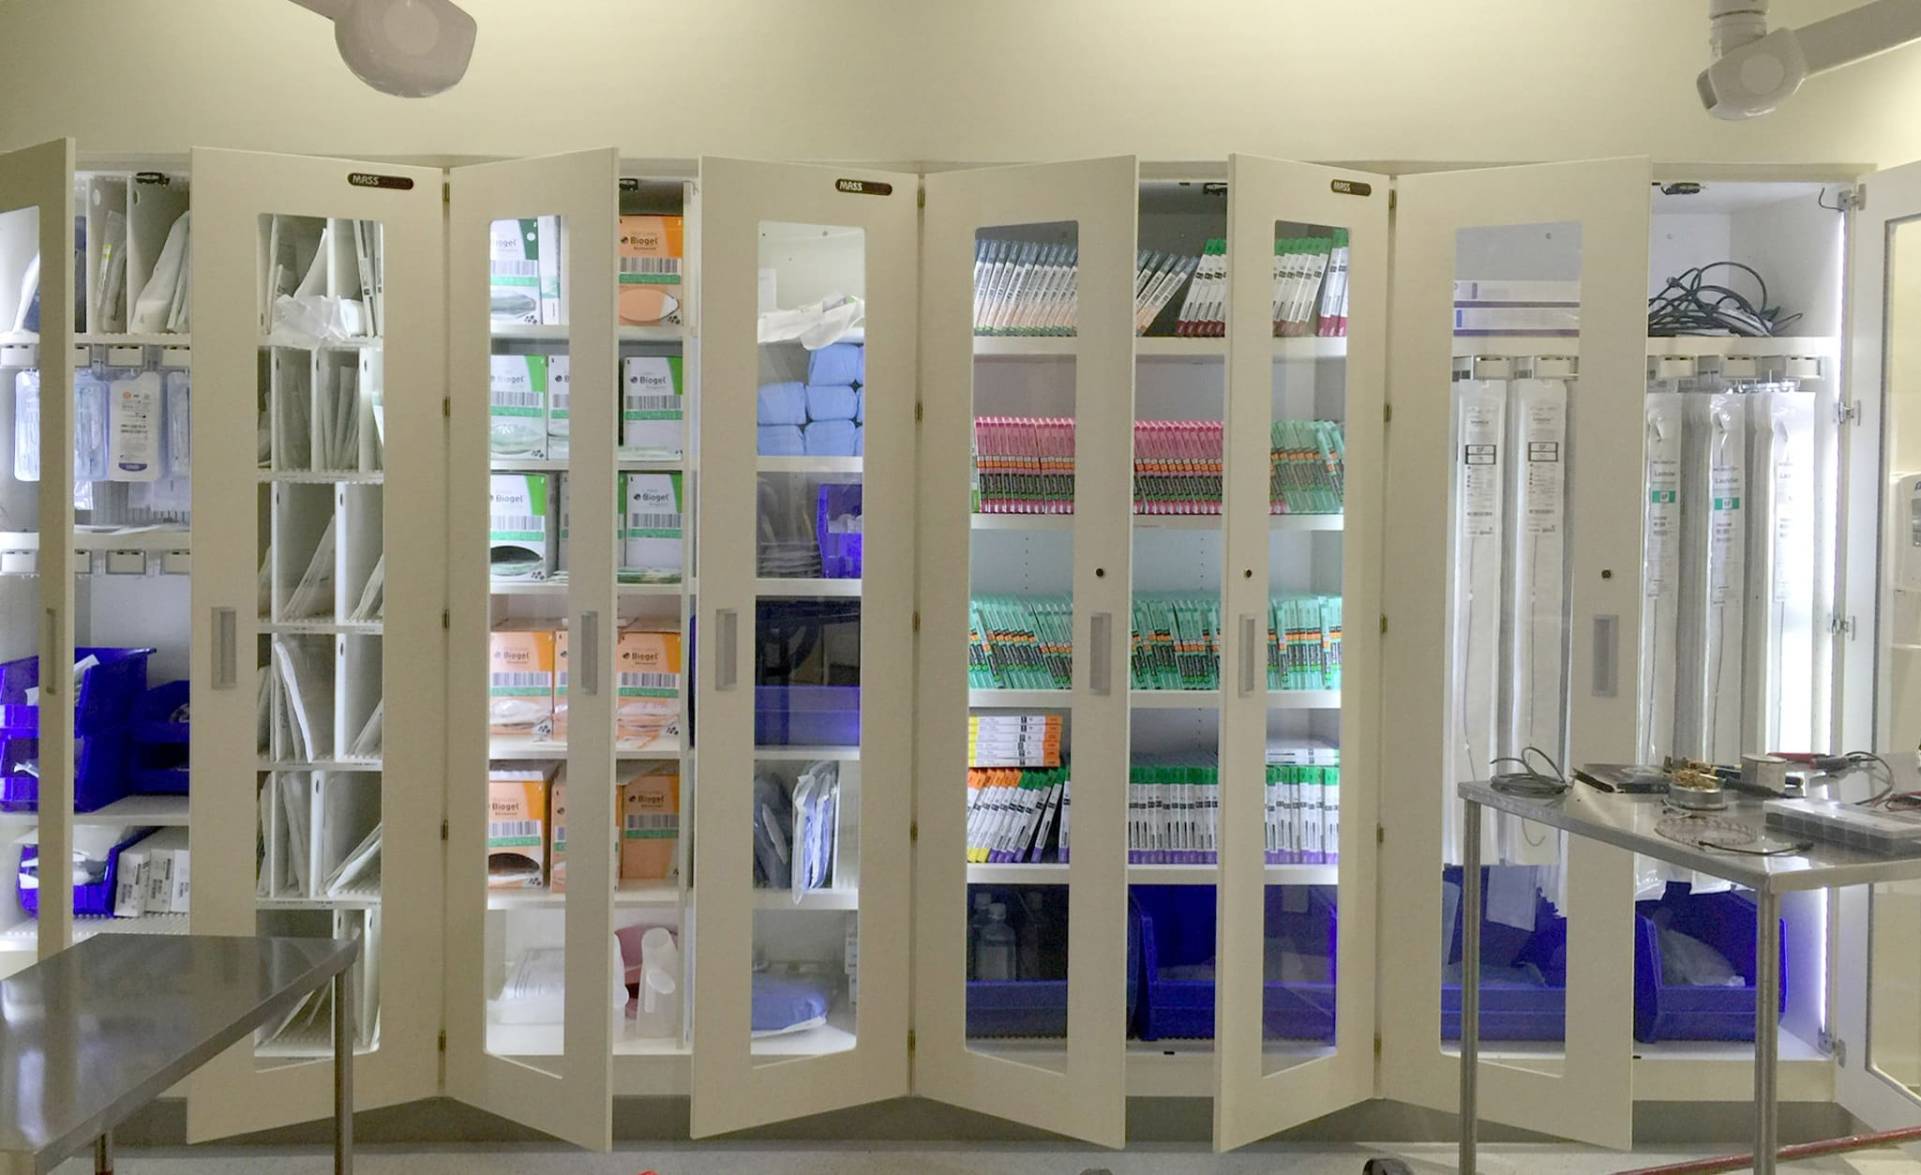 Image shows MASS Medical Storage Cabinets